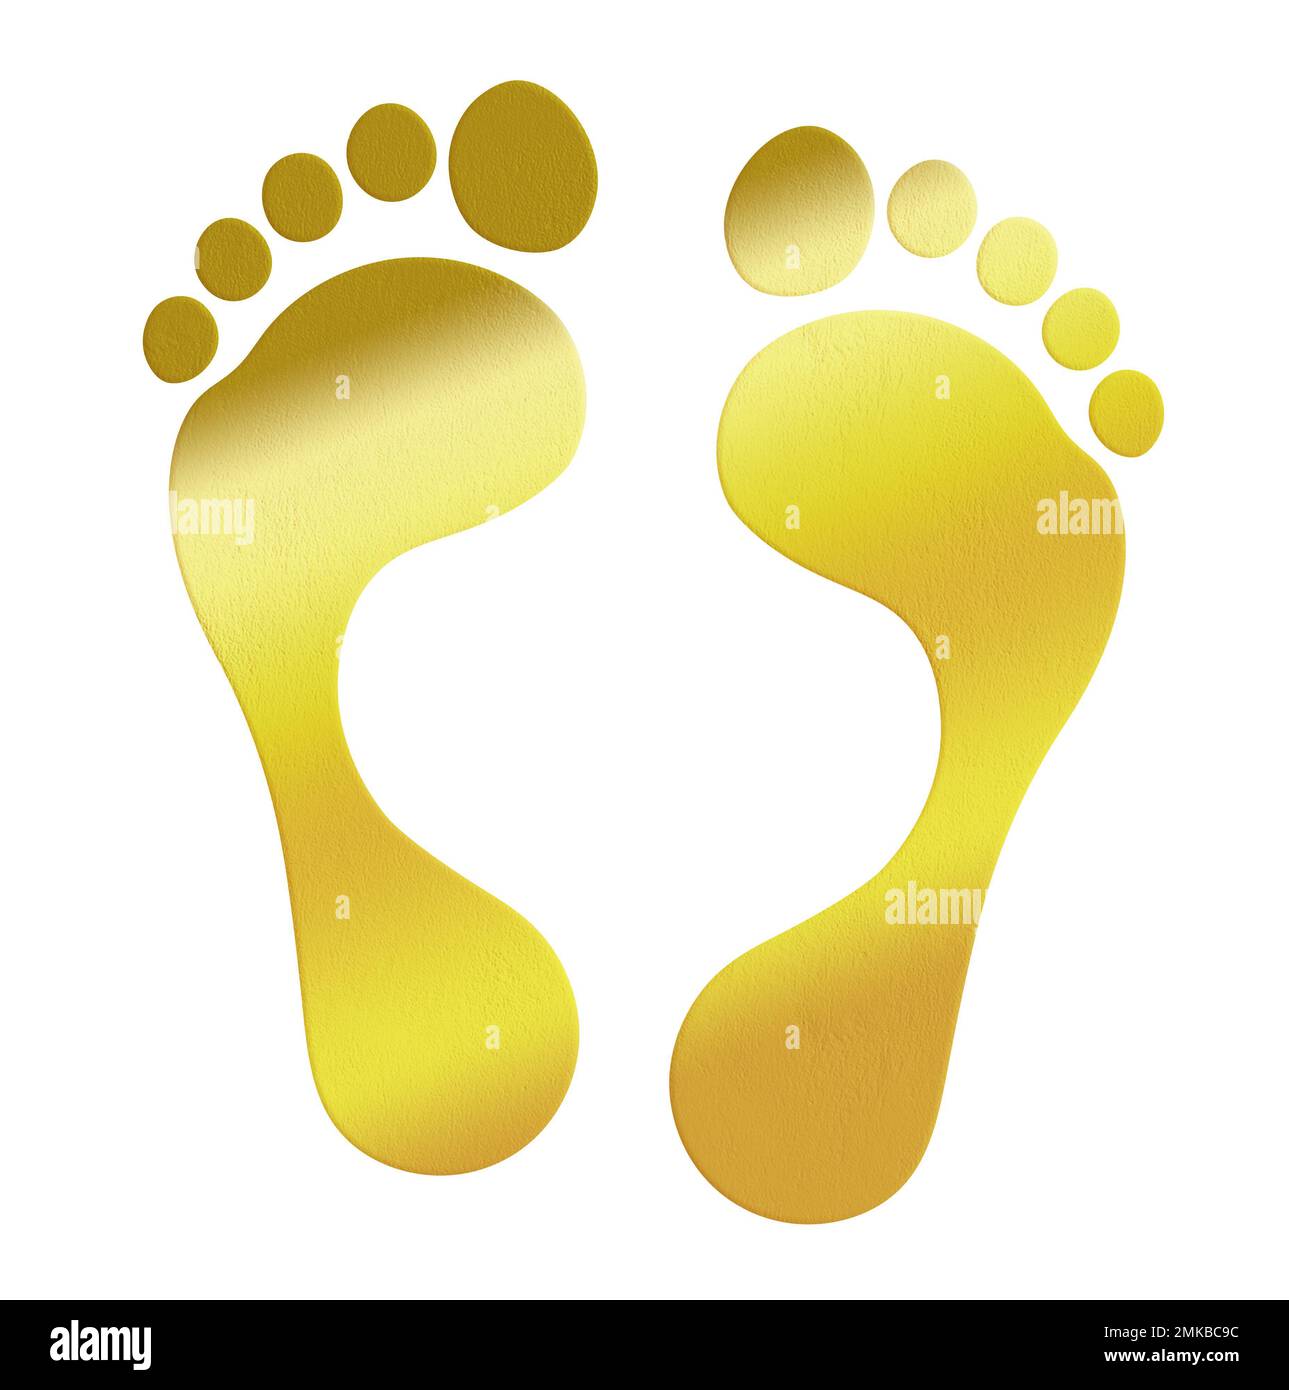 Feet or footprints in gold. Soles of a boy's feet. Template and form for advertising. Stock Photo